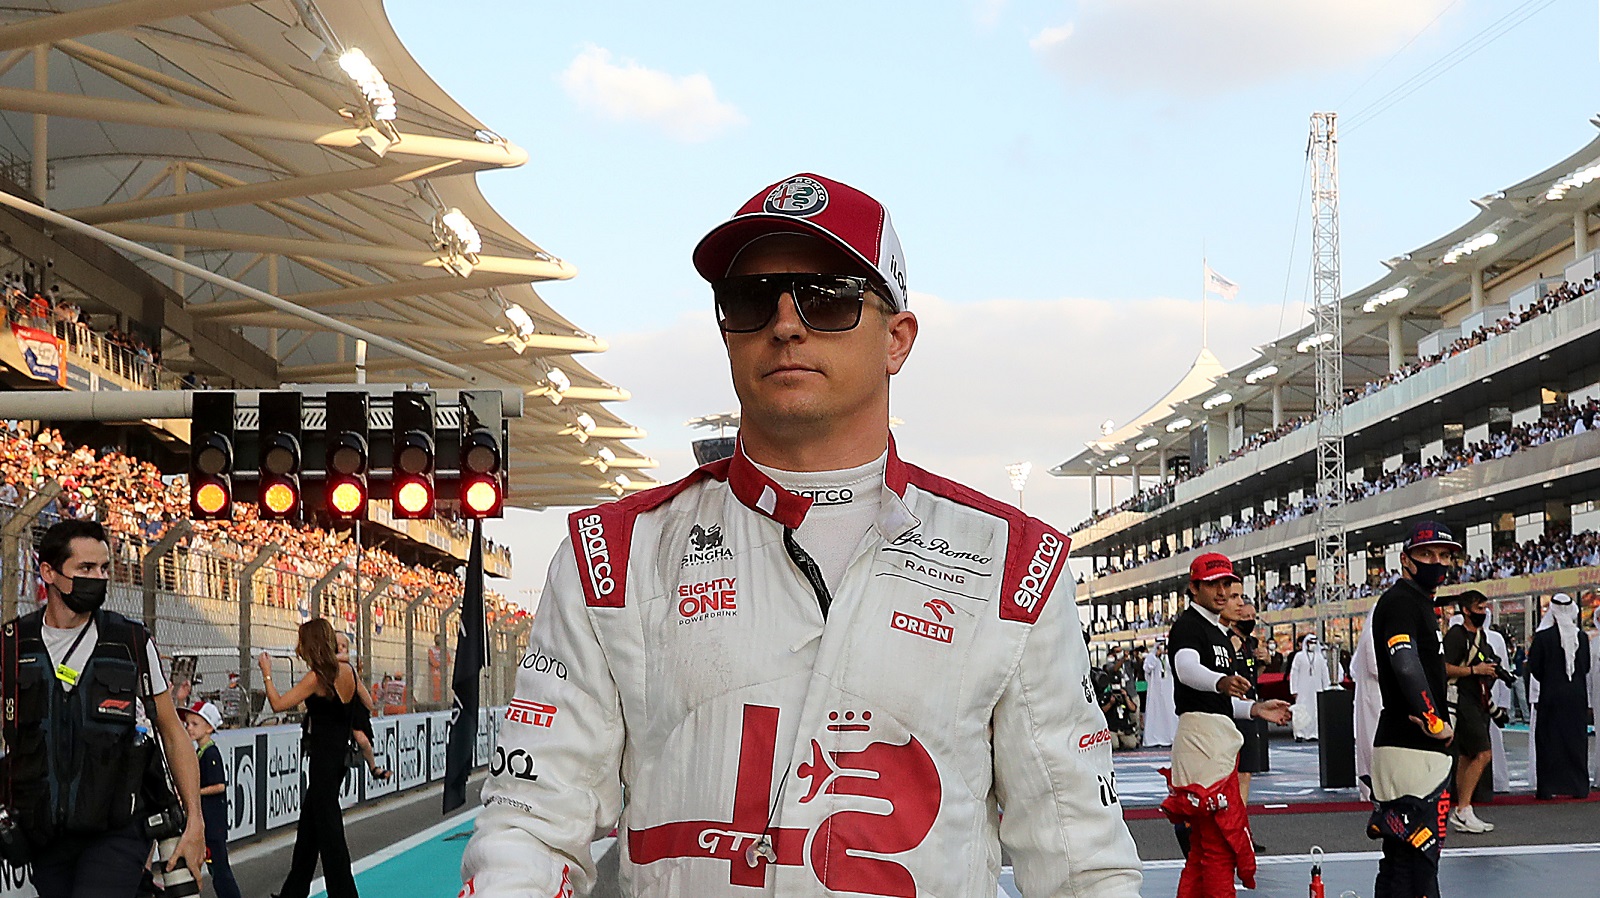 Kimi Raikkonen of Finland retired from Formula 1 at the conclusion of last season. He'll race in the NASCAR Cup Series on AUg. 21 at Watkins Glen. | Kamran Jebreili - Pool/Getty Images